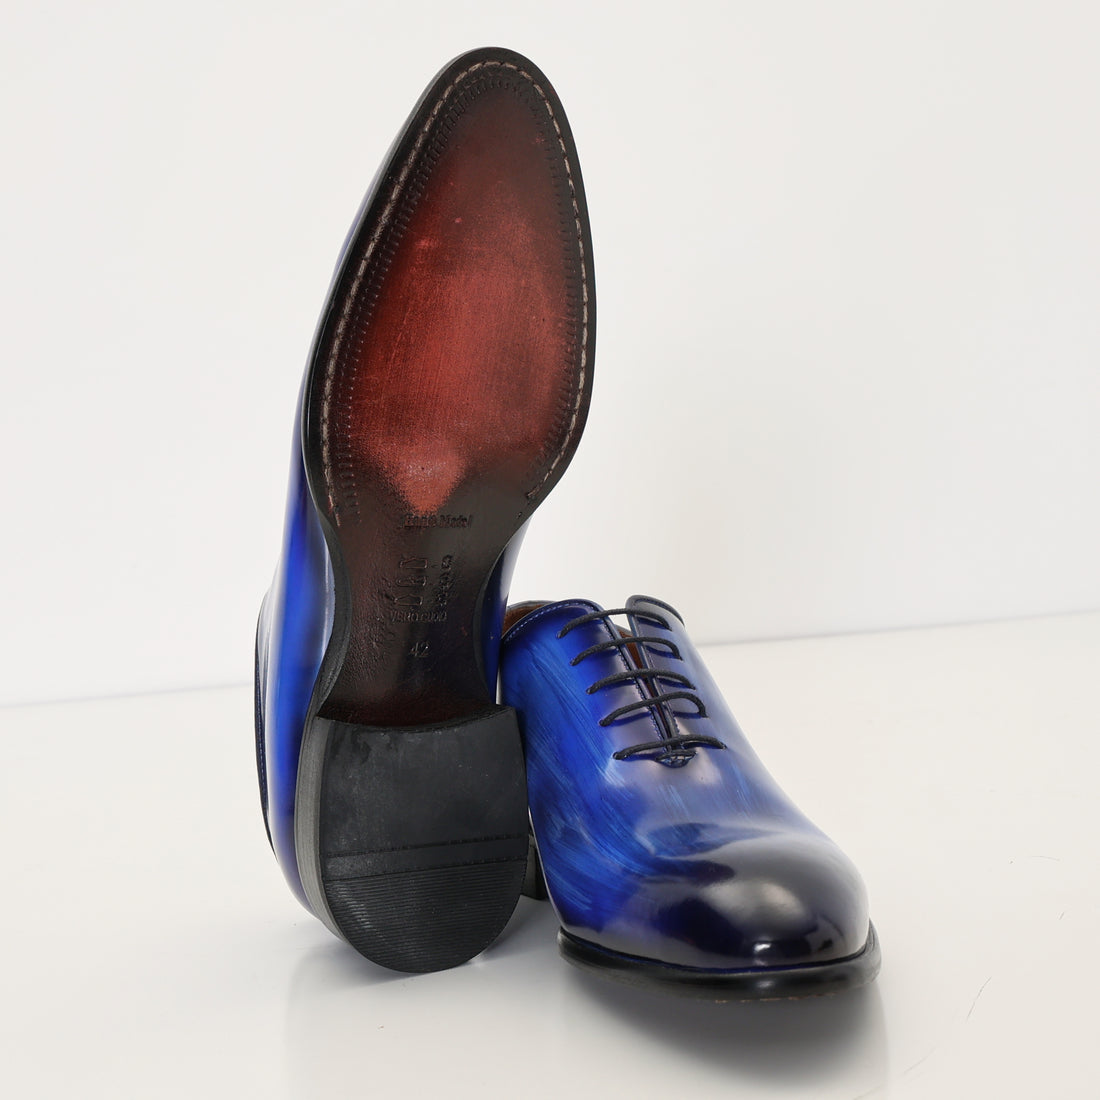 N° AC04 hand paint patina PATENT LEATHER OXFORDS - BLUE